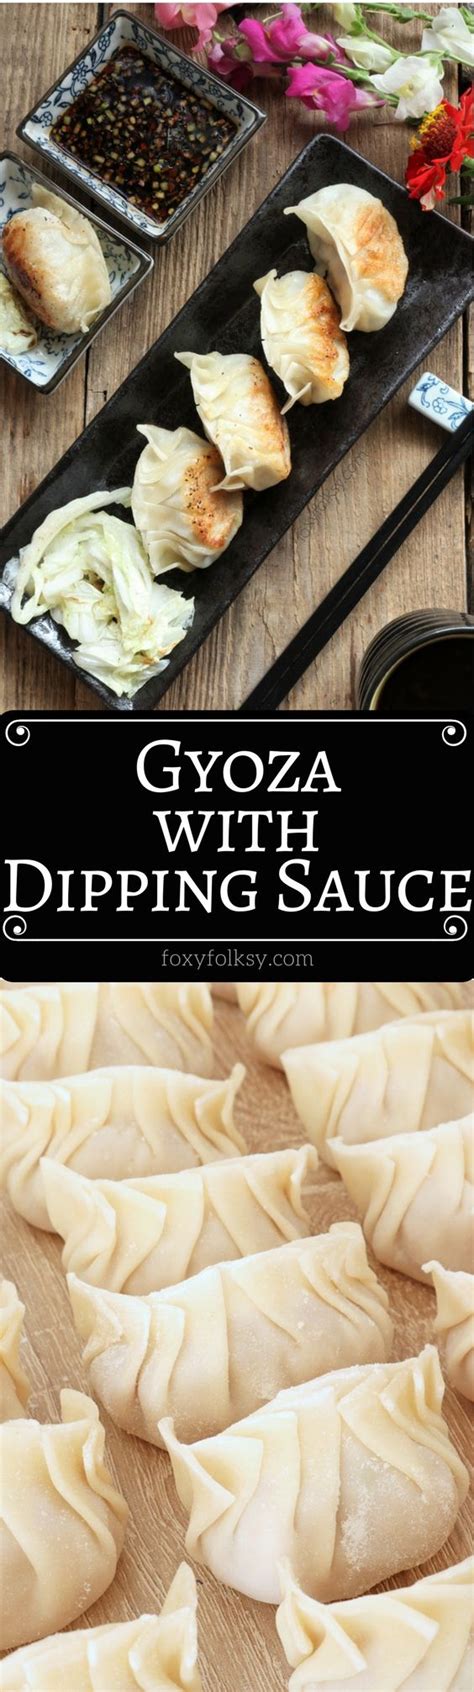 When you buy through links on our site, we may earn an affiliate commission. Gyoza Recipe with dipping sauce | Recipe | Recipes, Gyoza ...